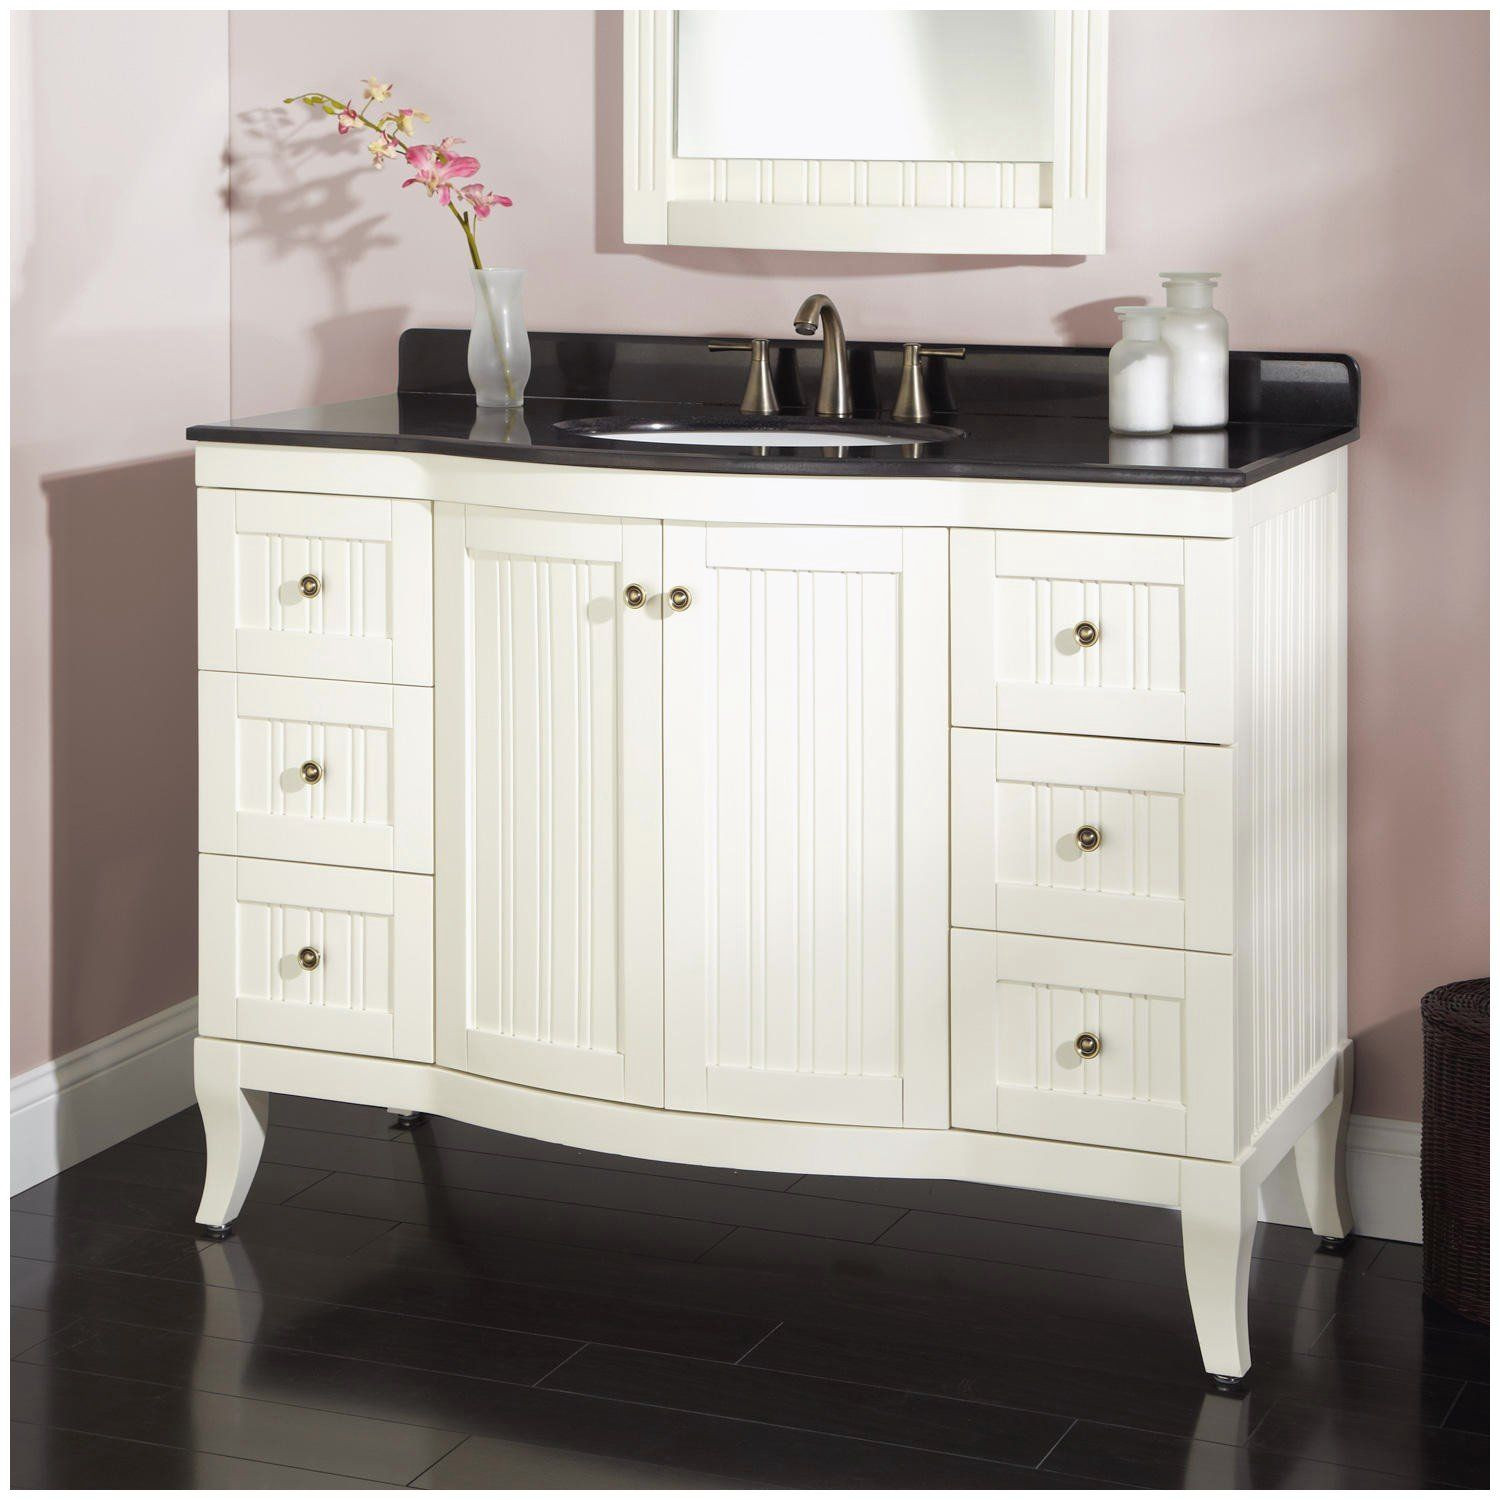 Home Depot Bathroom Vanity Clearance
 Lowes Clearance Bathroom Vanities in 2020 With images